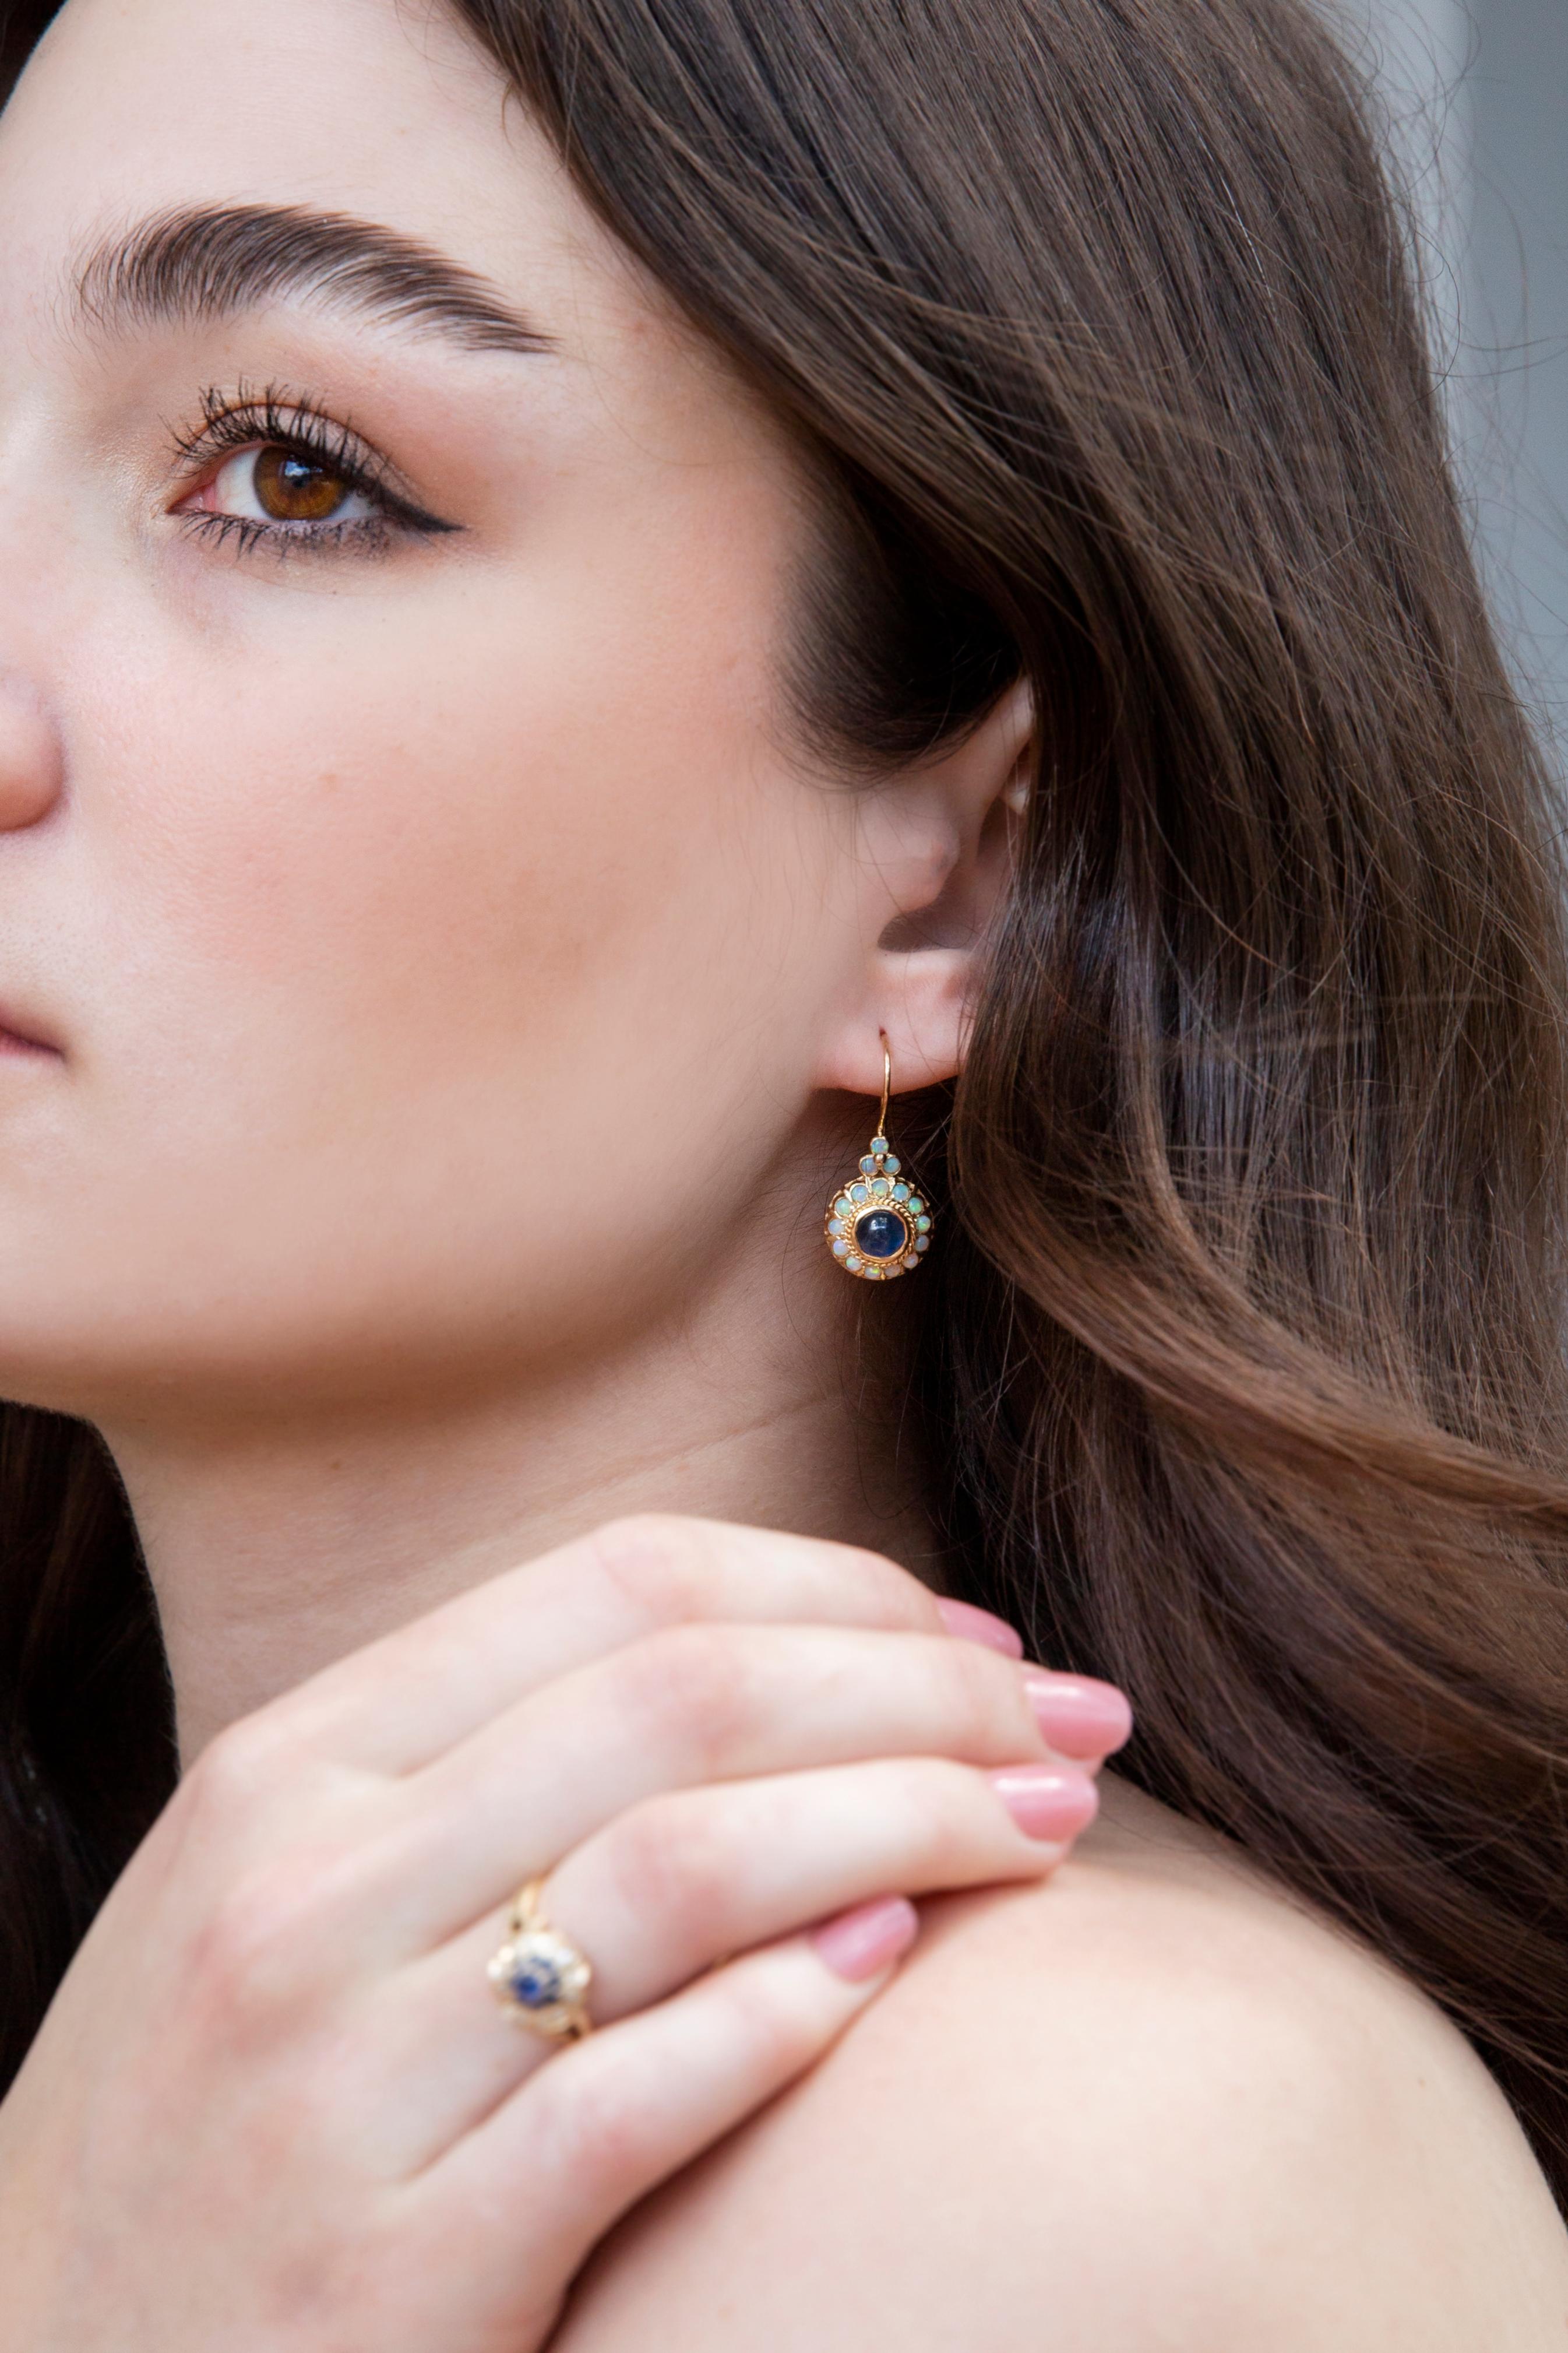 The Etta Earrings are a rich fusion of bright blue sapphires and radiant opals, wrapped in gold and presenting as darling daisies. A wonderful celebration of natures whimsy that will journey with you and yours through the years.

The Etta Earrings